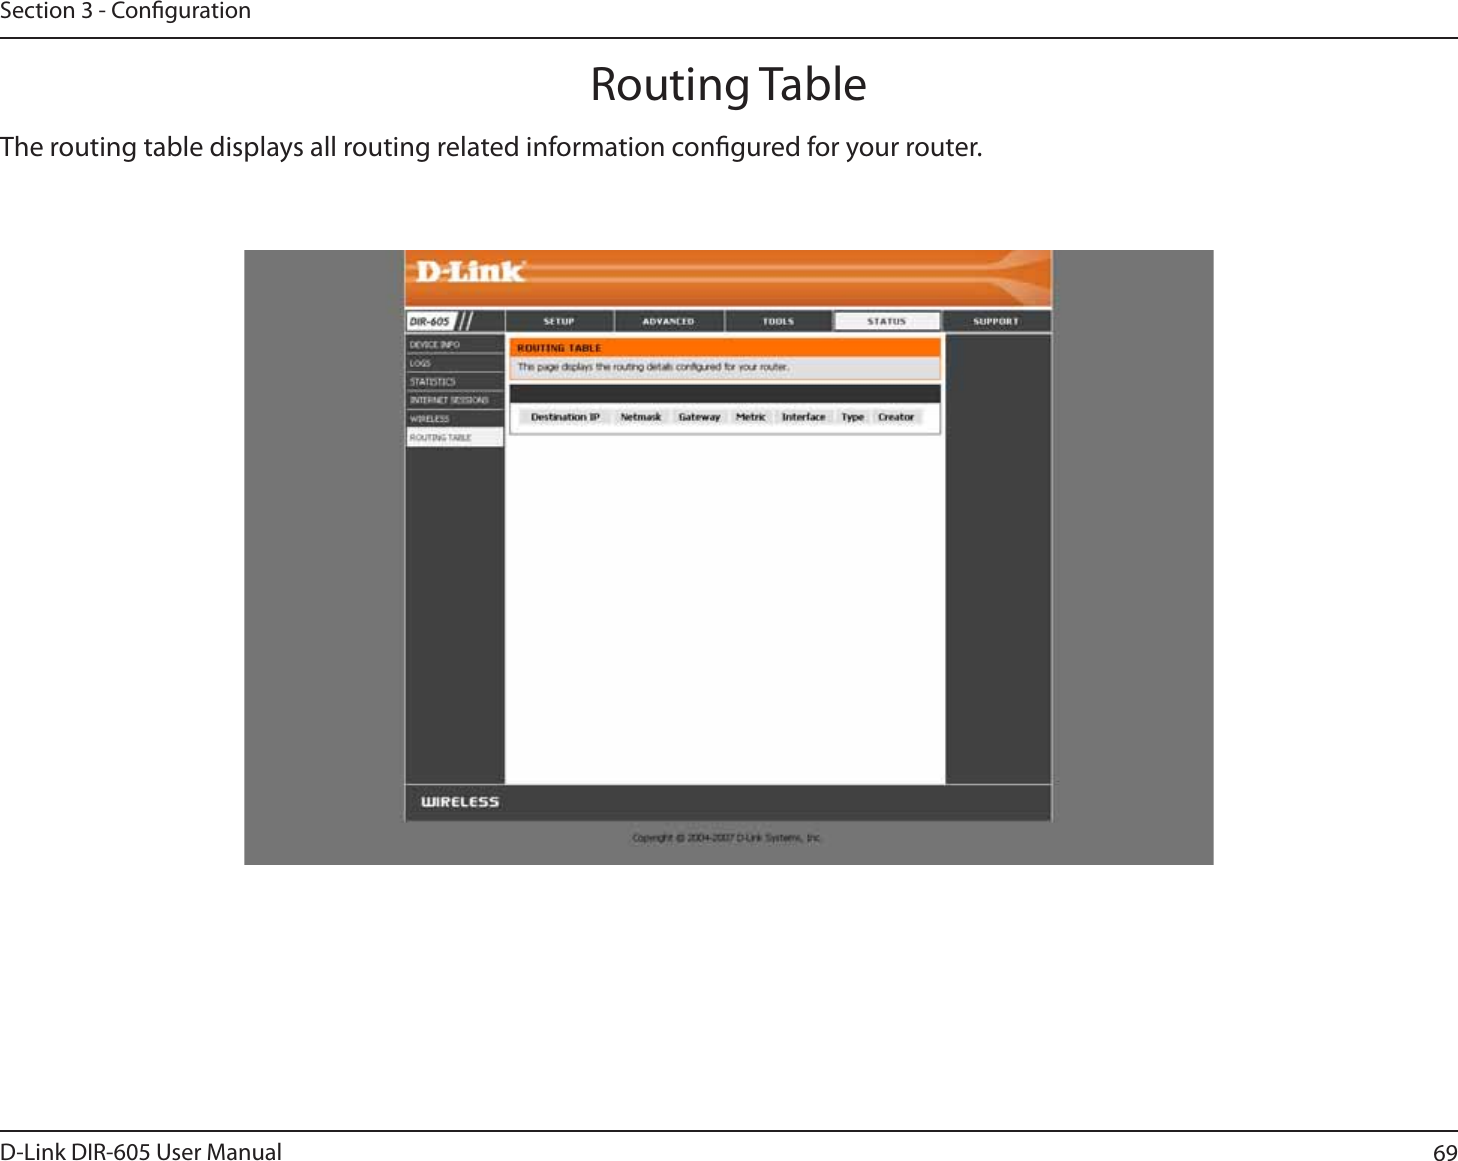 69D-Link DIR-605 User ManualSection 3 - CongurationThe routing table displays all routing related information congured for your router.Routing Table